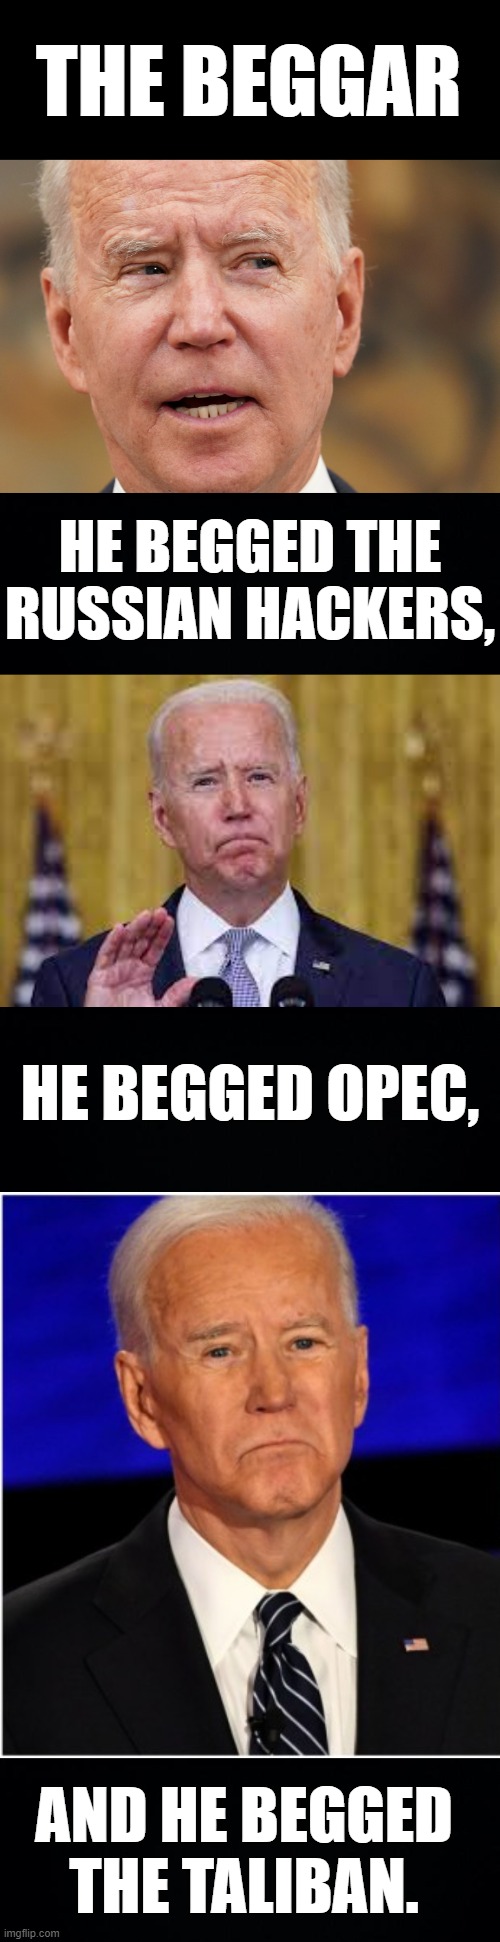 What Do You Think About...Joe Biden | THE BEGGAR; HE BEGGED THE RUSSIAN HACKERS, HE BEGGED OPEC, AND HE BEGGED THE TALIBAN. | image tagged in memes,politics,joe biden,beggar,russian hackers,taliban | made w/ Imgflip meme maker